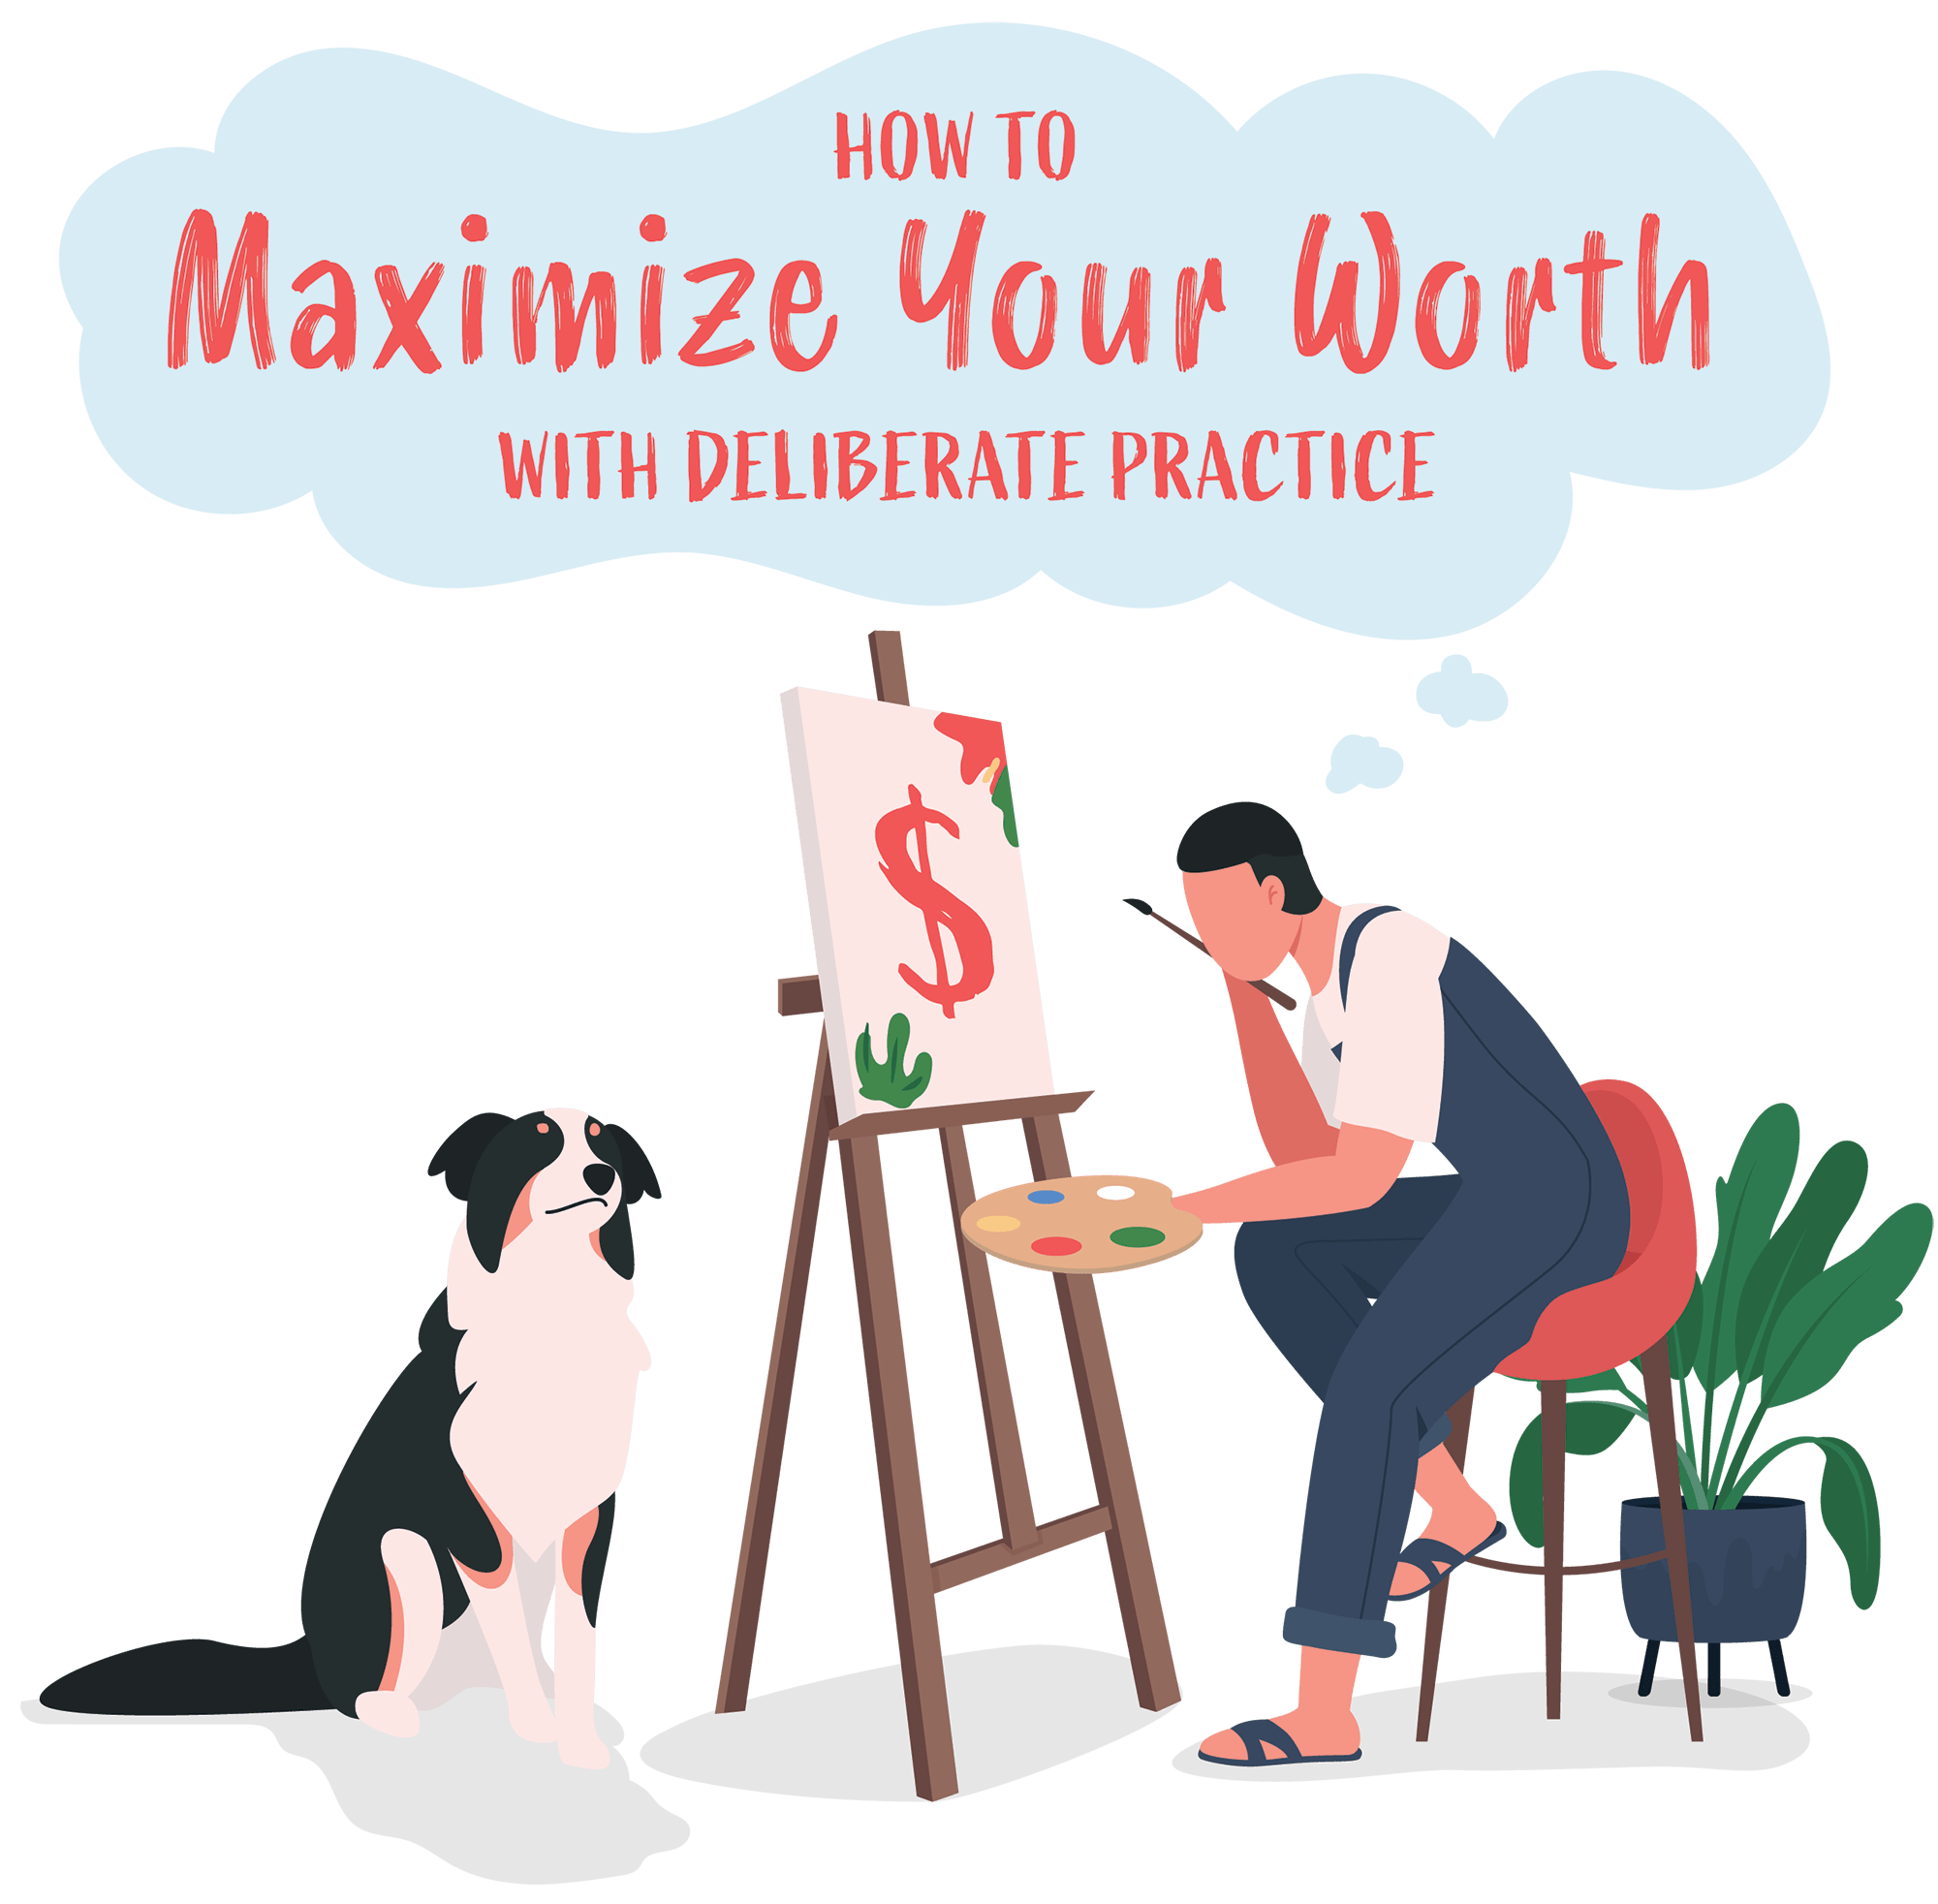 Illustration of artist sitting in front of an easel that has a dollar sign painted on it, a dog sitting next to the easel